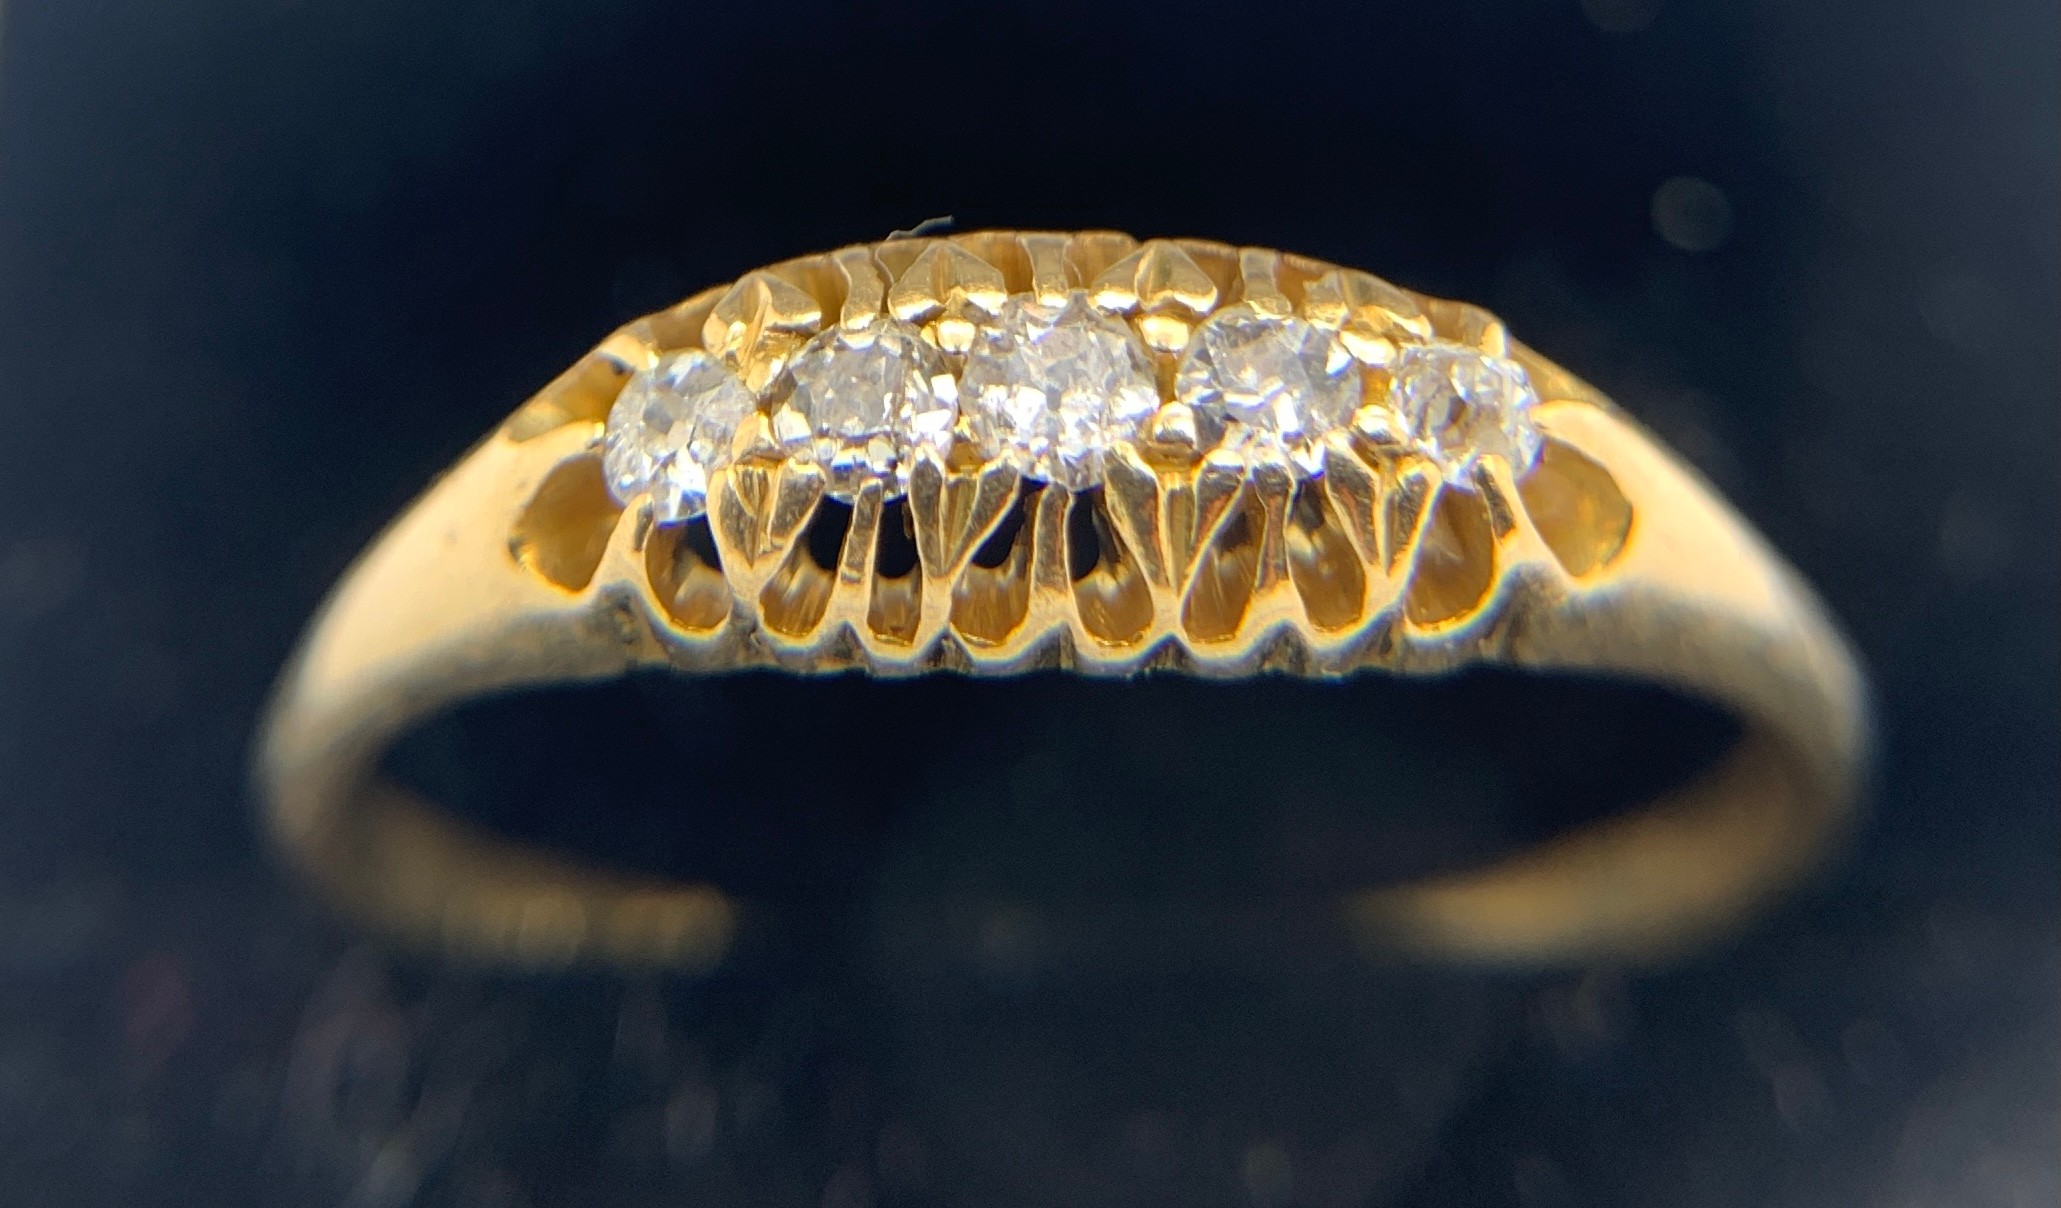 An 18ct gold ring set with 5 diamonds. Size W. weight 3gms.Condition ReportGood condition.